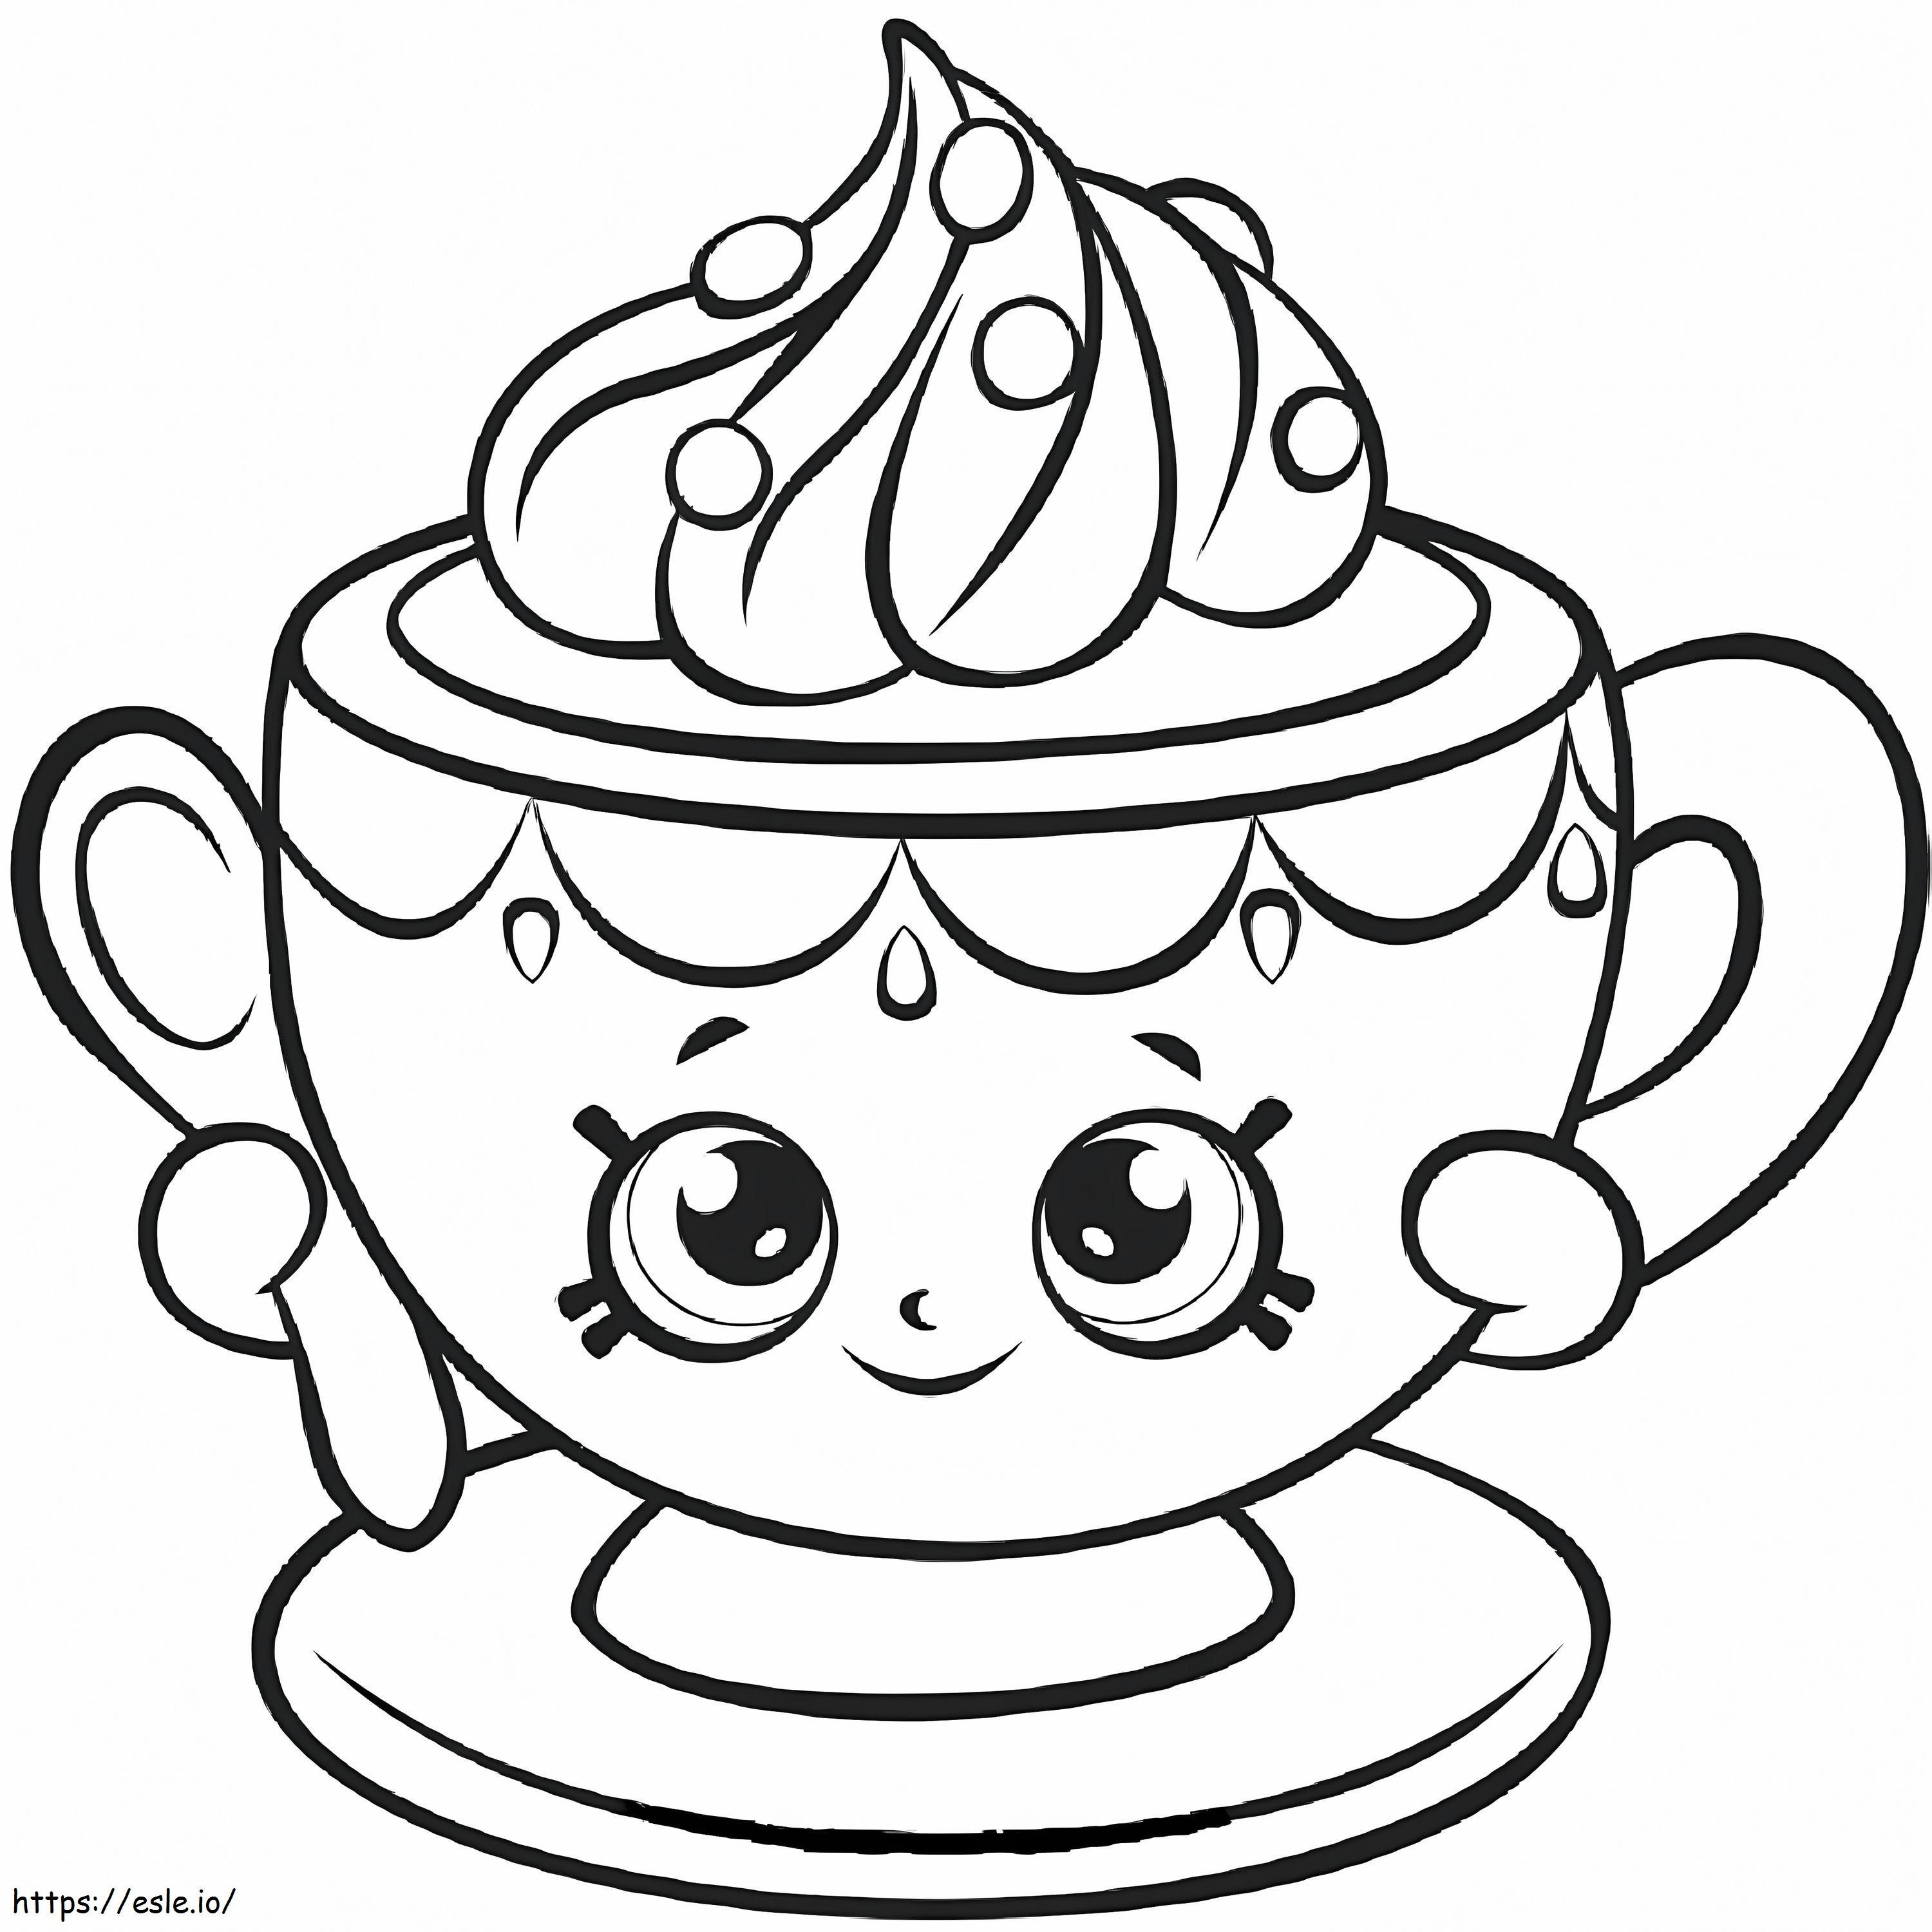 Tiny Teacup Shopkin coloring page